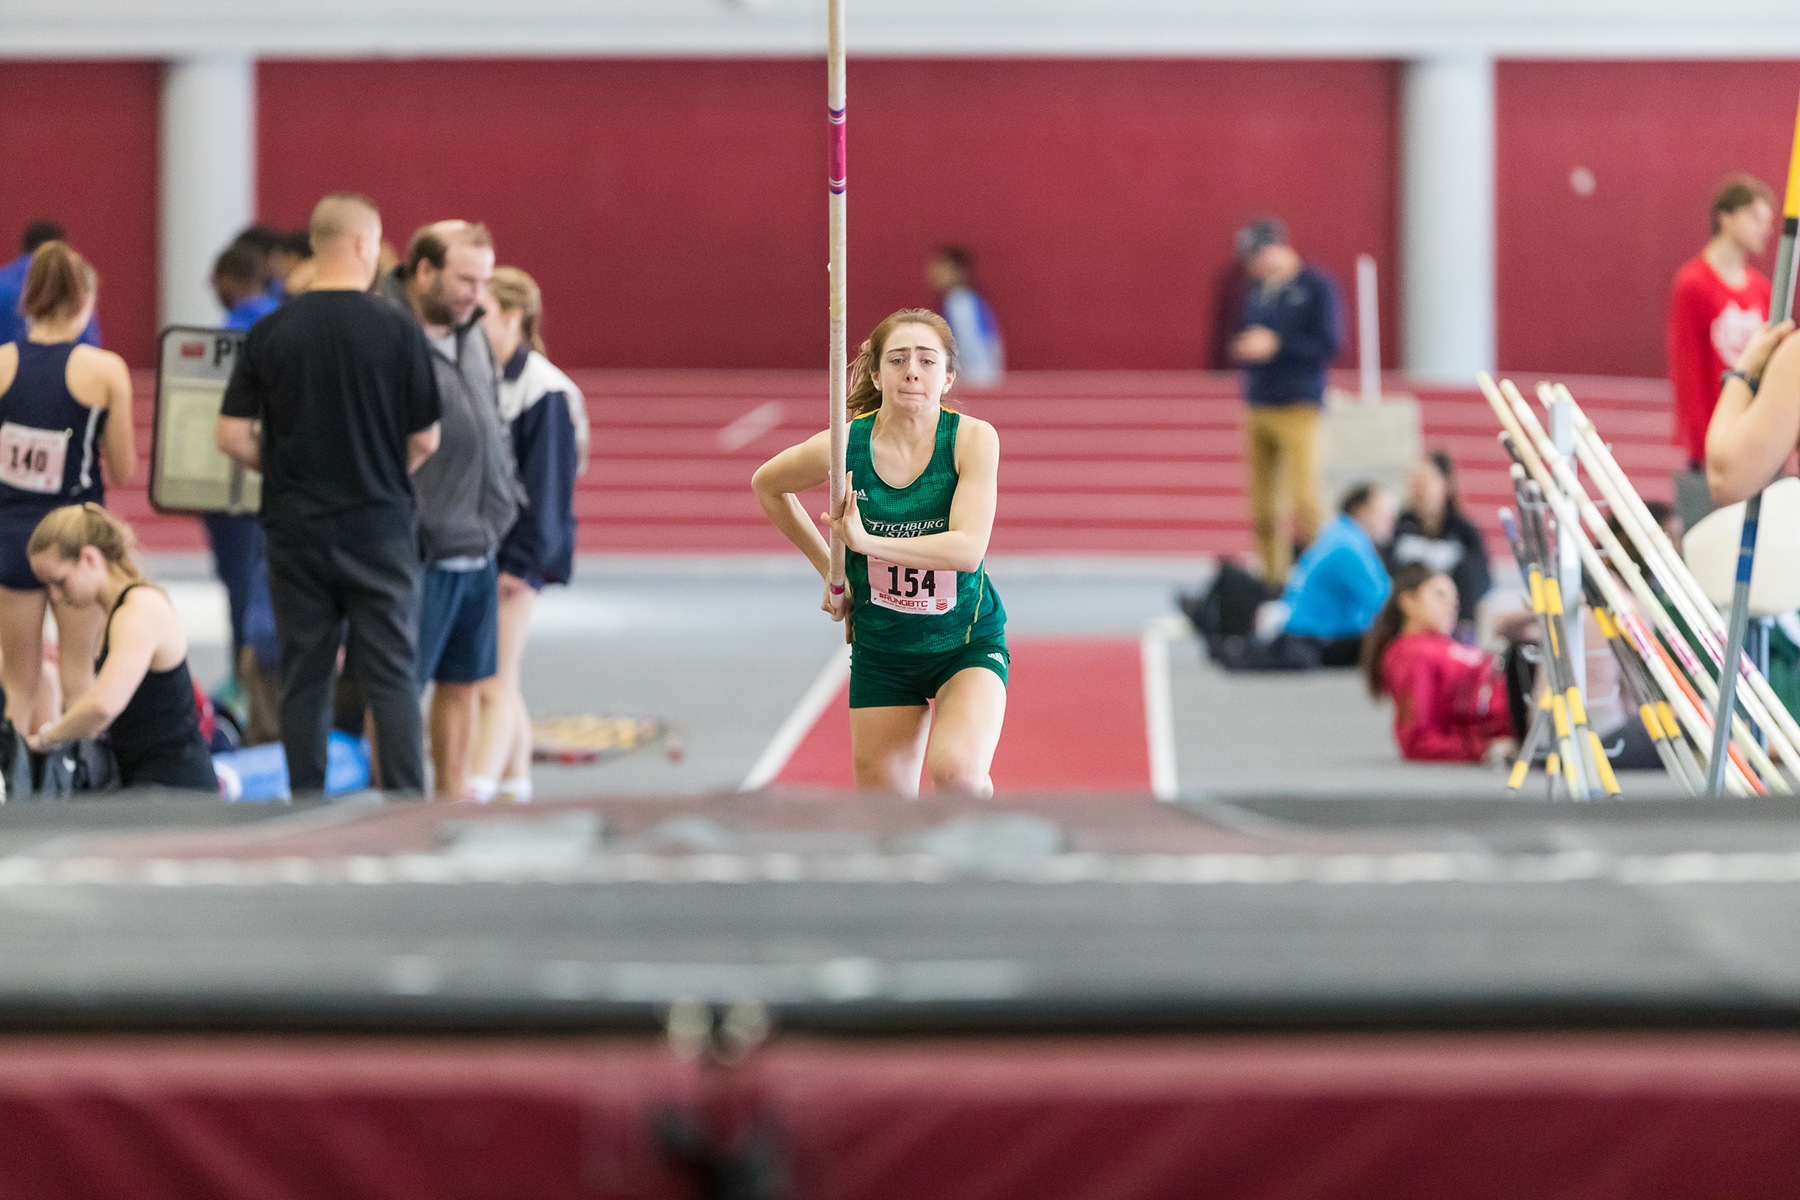 Falcons Place Fourth At MASCAC Indoor Track Championships